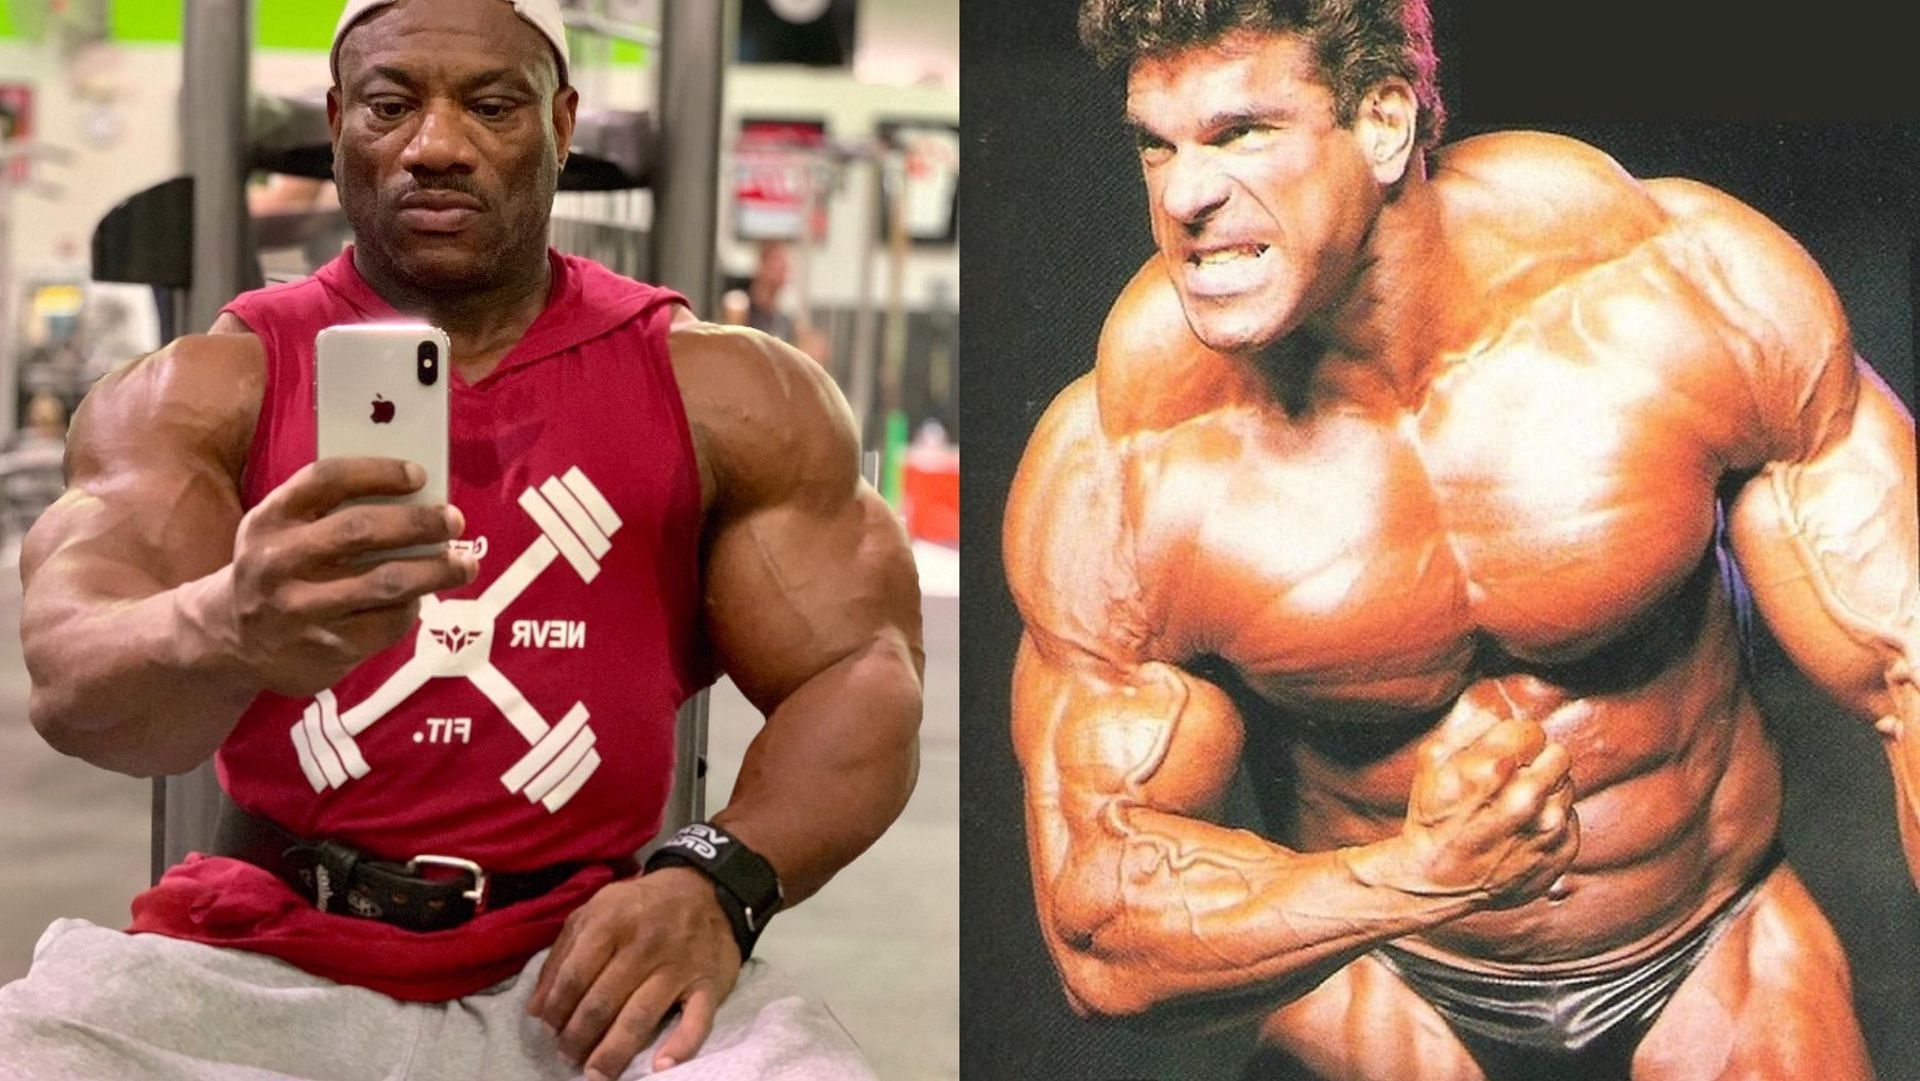 Bodybuilders like to stay fit even after they are retired from the sport (Image via Instagram)